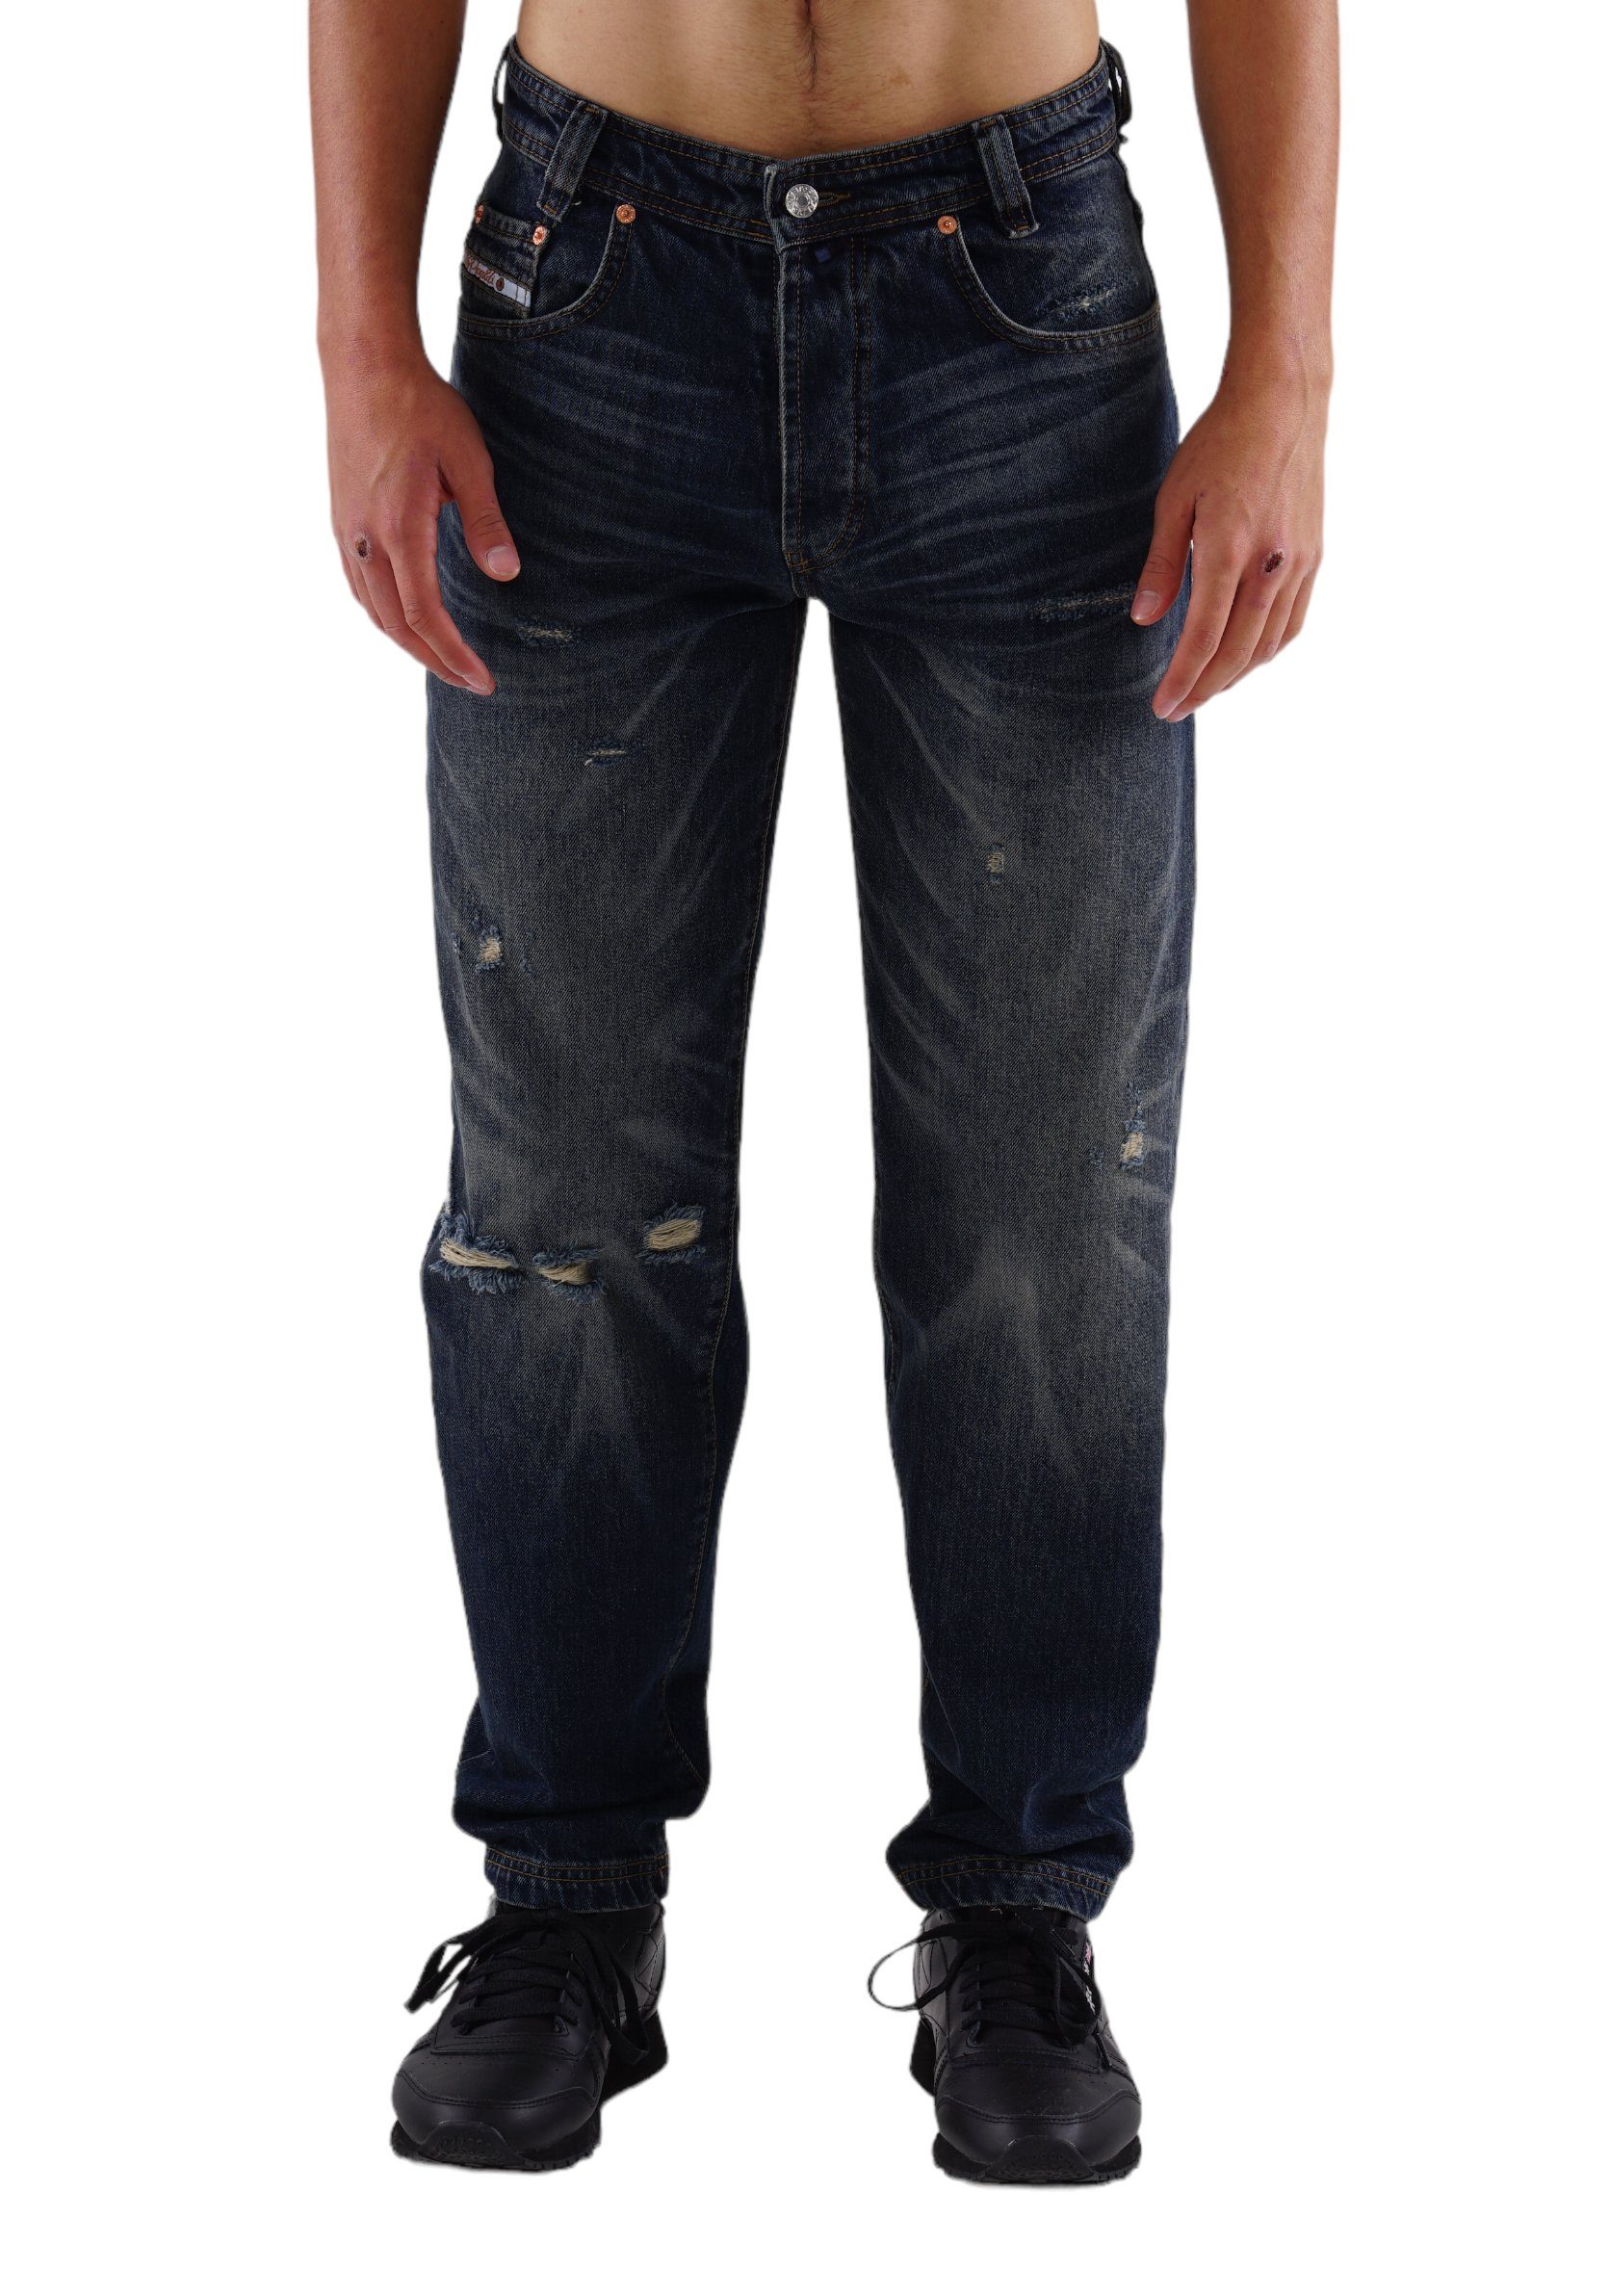 PICALDI Jeans Weite Jeans Zicco 472 Loose Fit, Relaxed Fit Austin